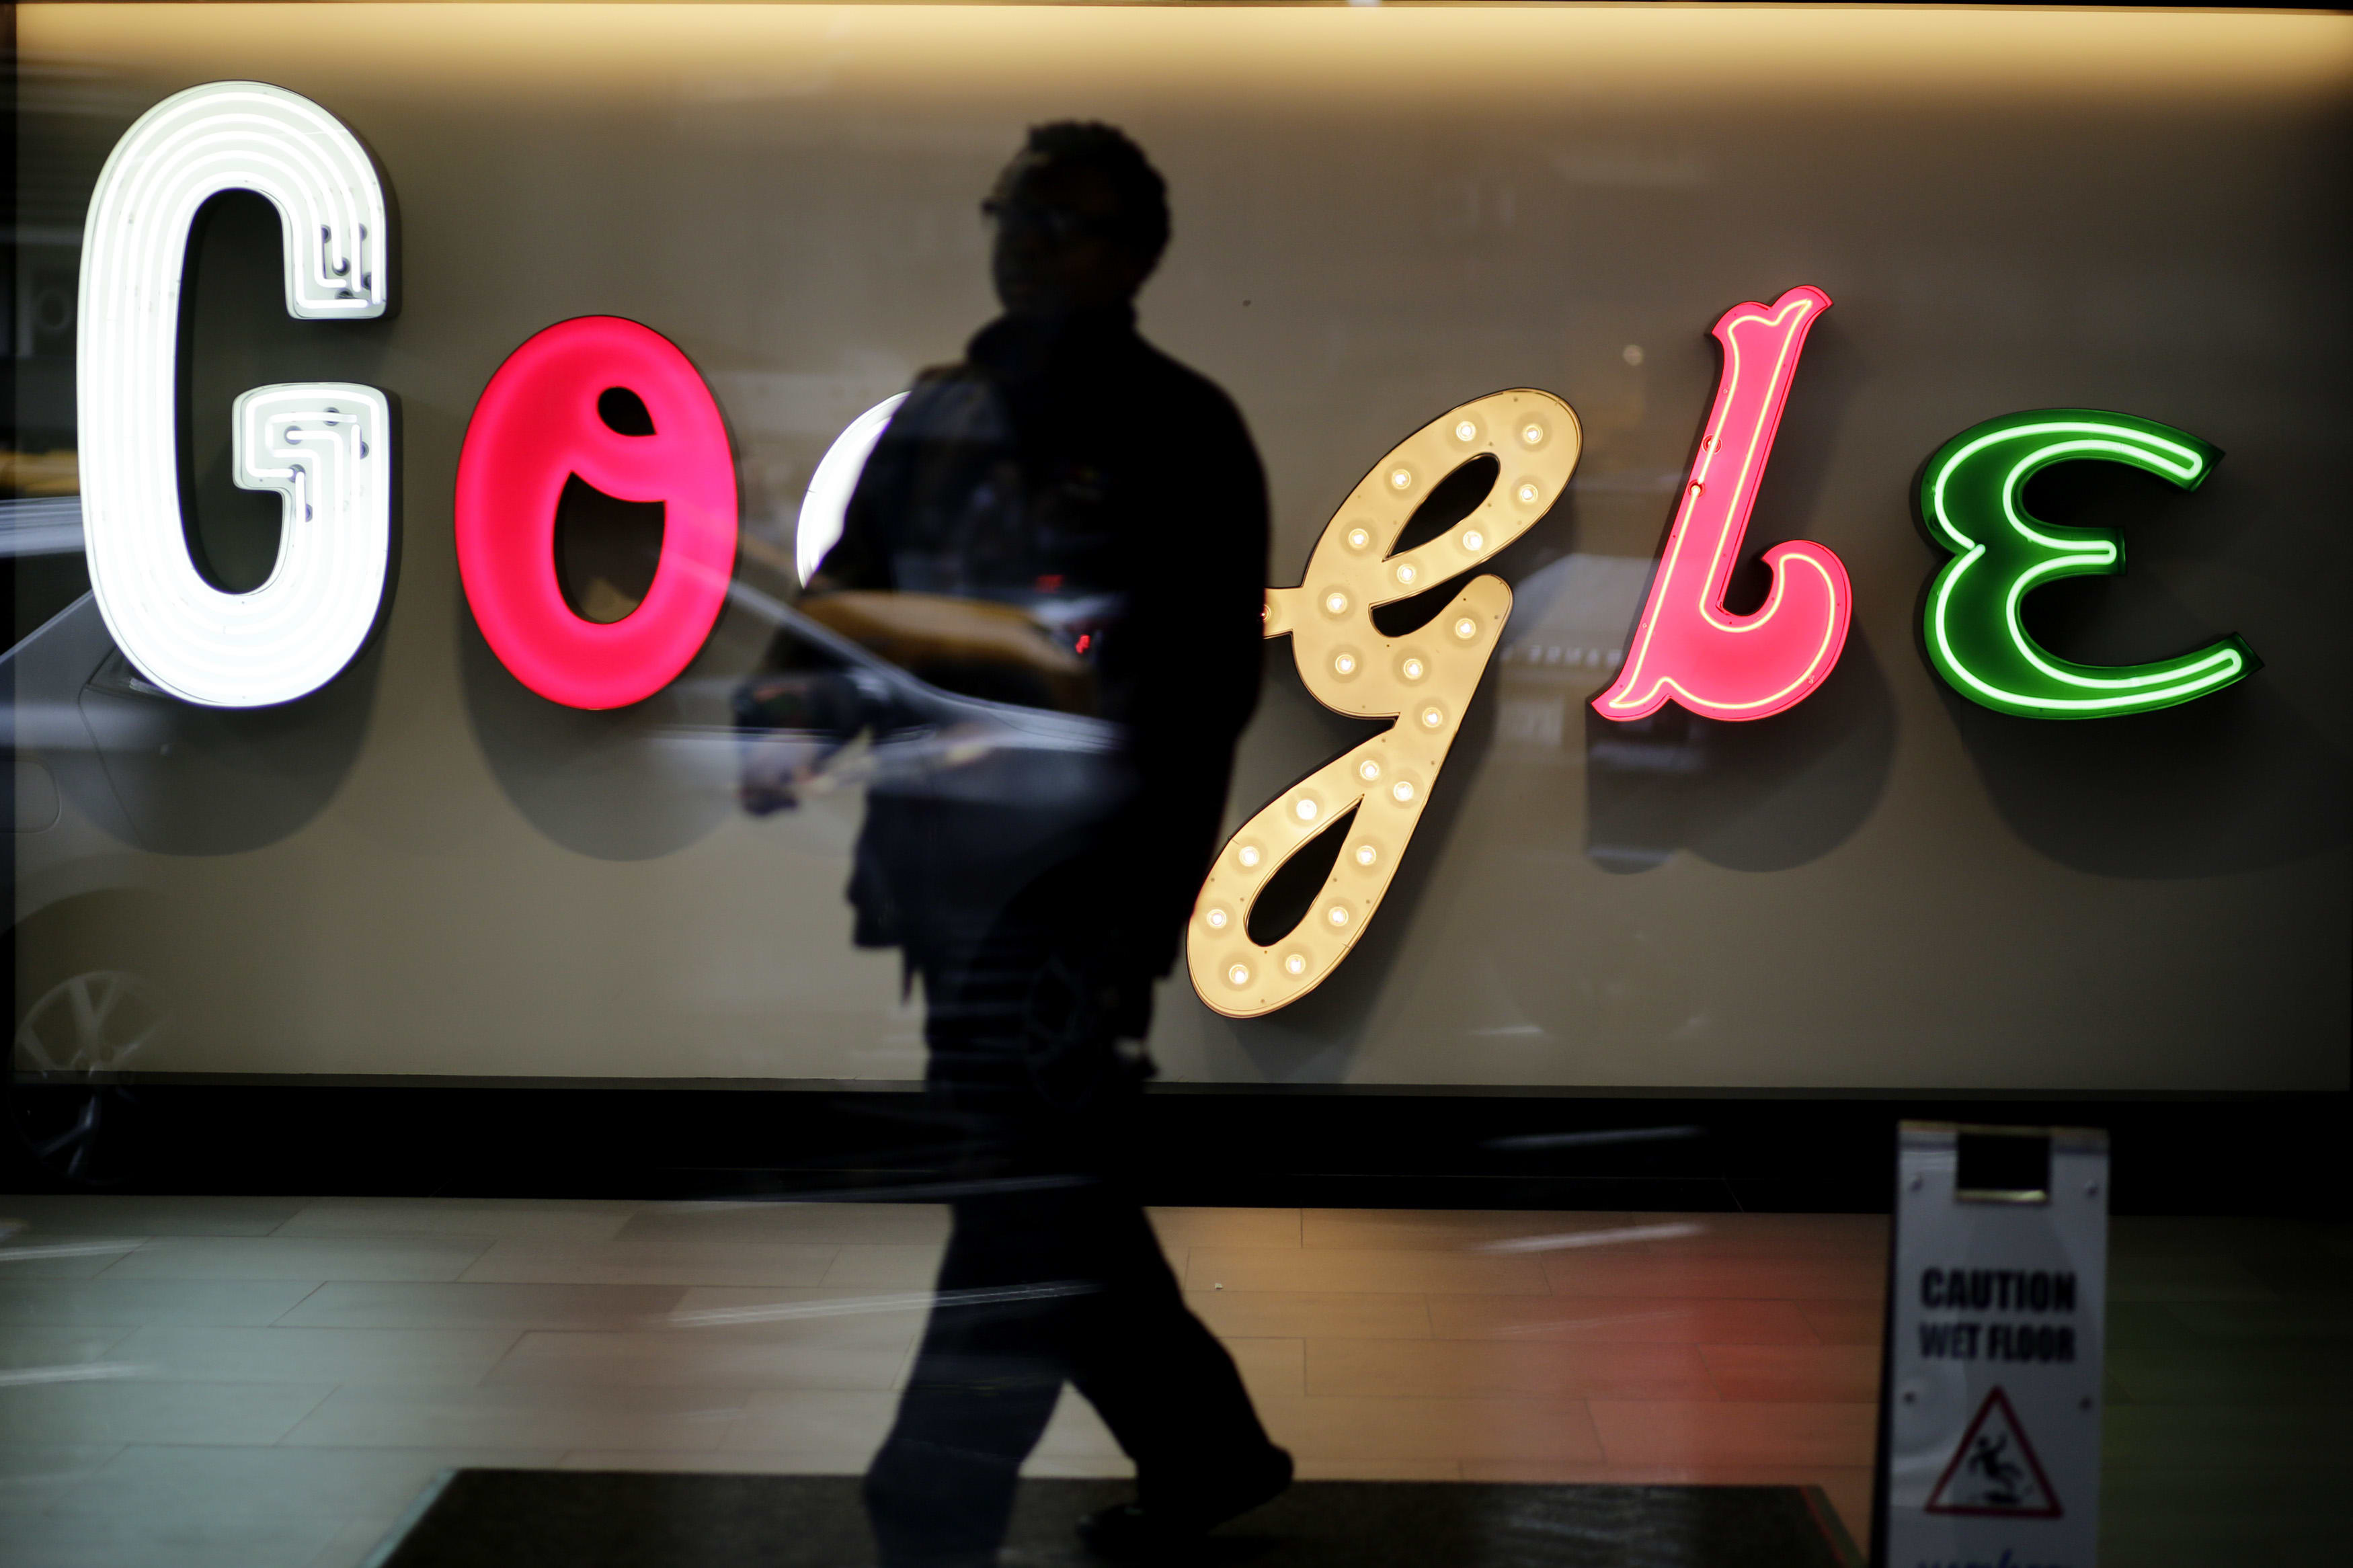 Google restricts Internet access for some employees for security